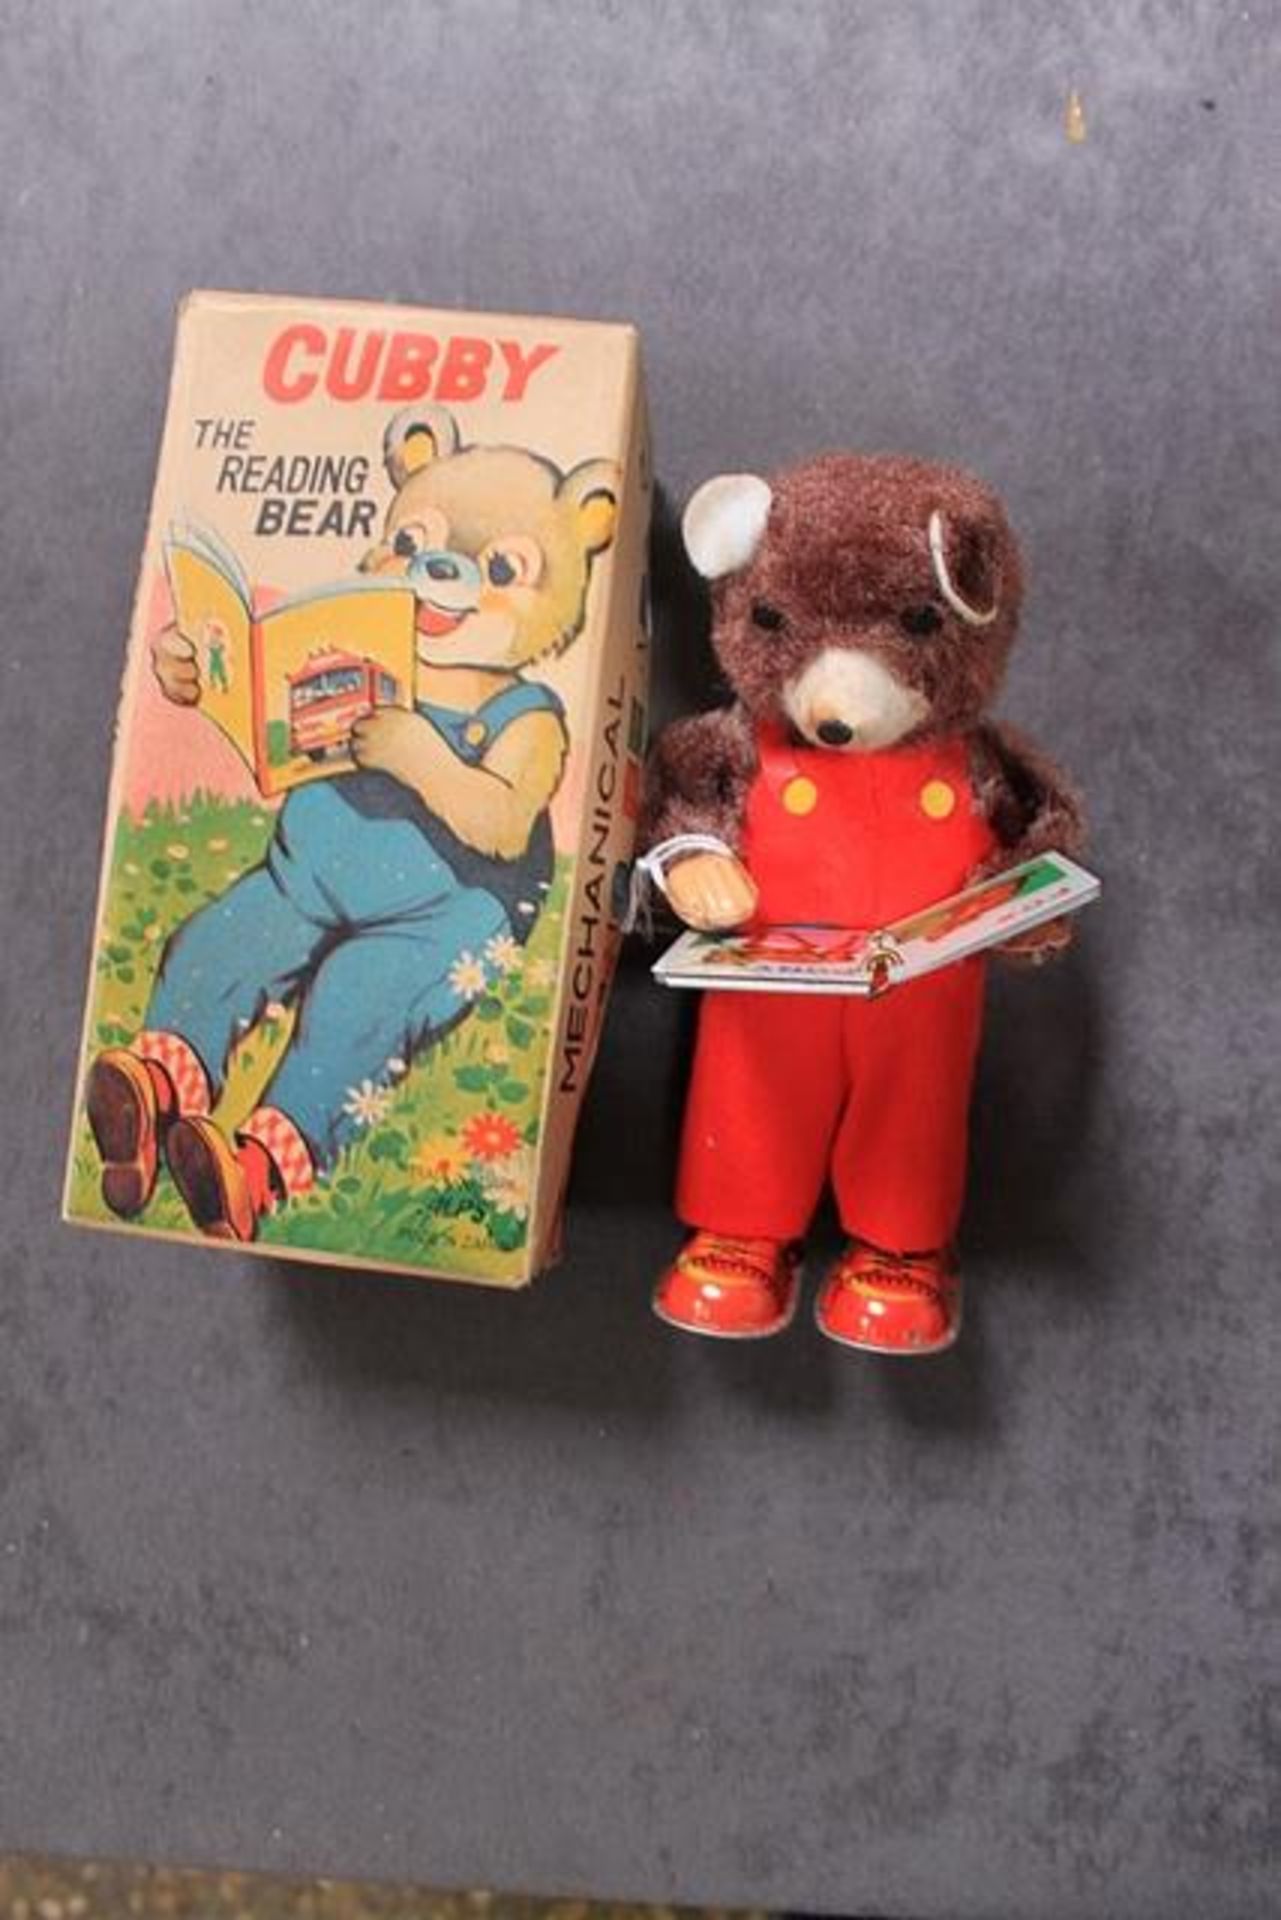 Alps (Japan) Cubby The Reading Bear Mechanical Toy Wind-Up 7 Inch Tall - Image 2 of 2